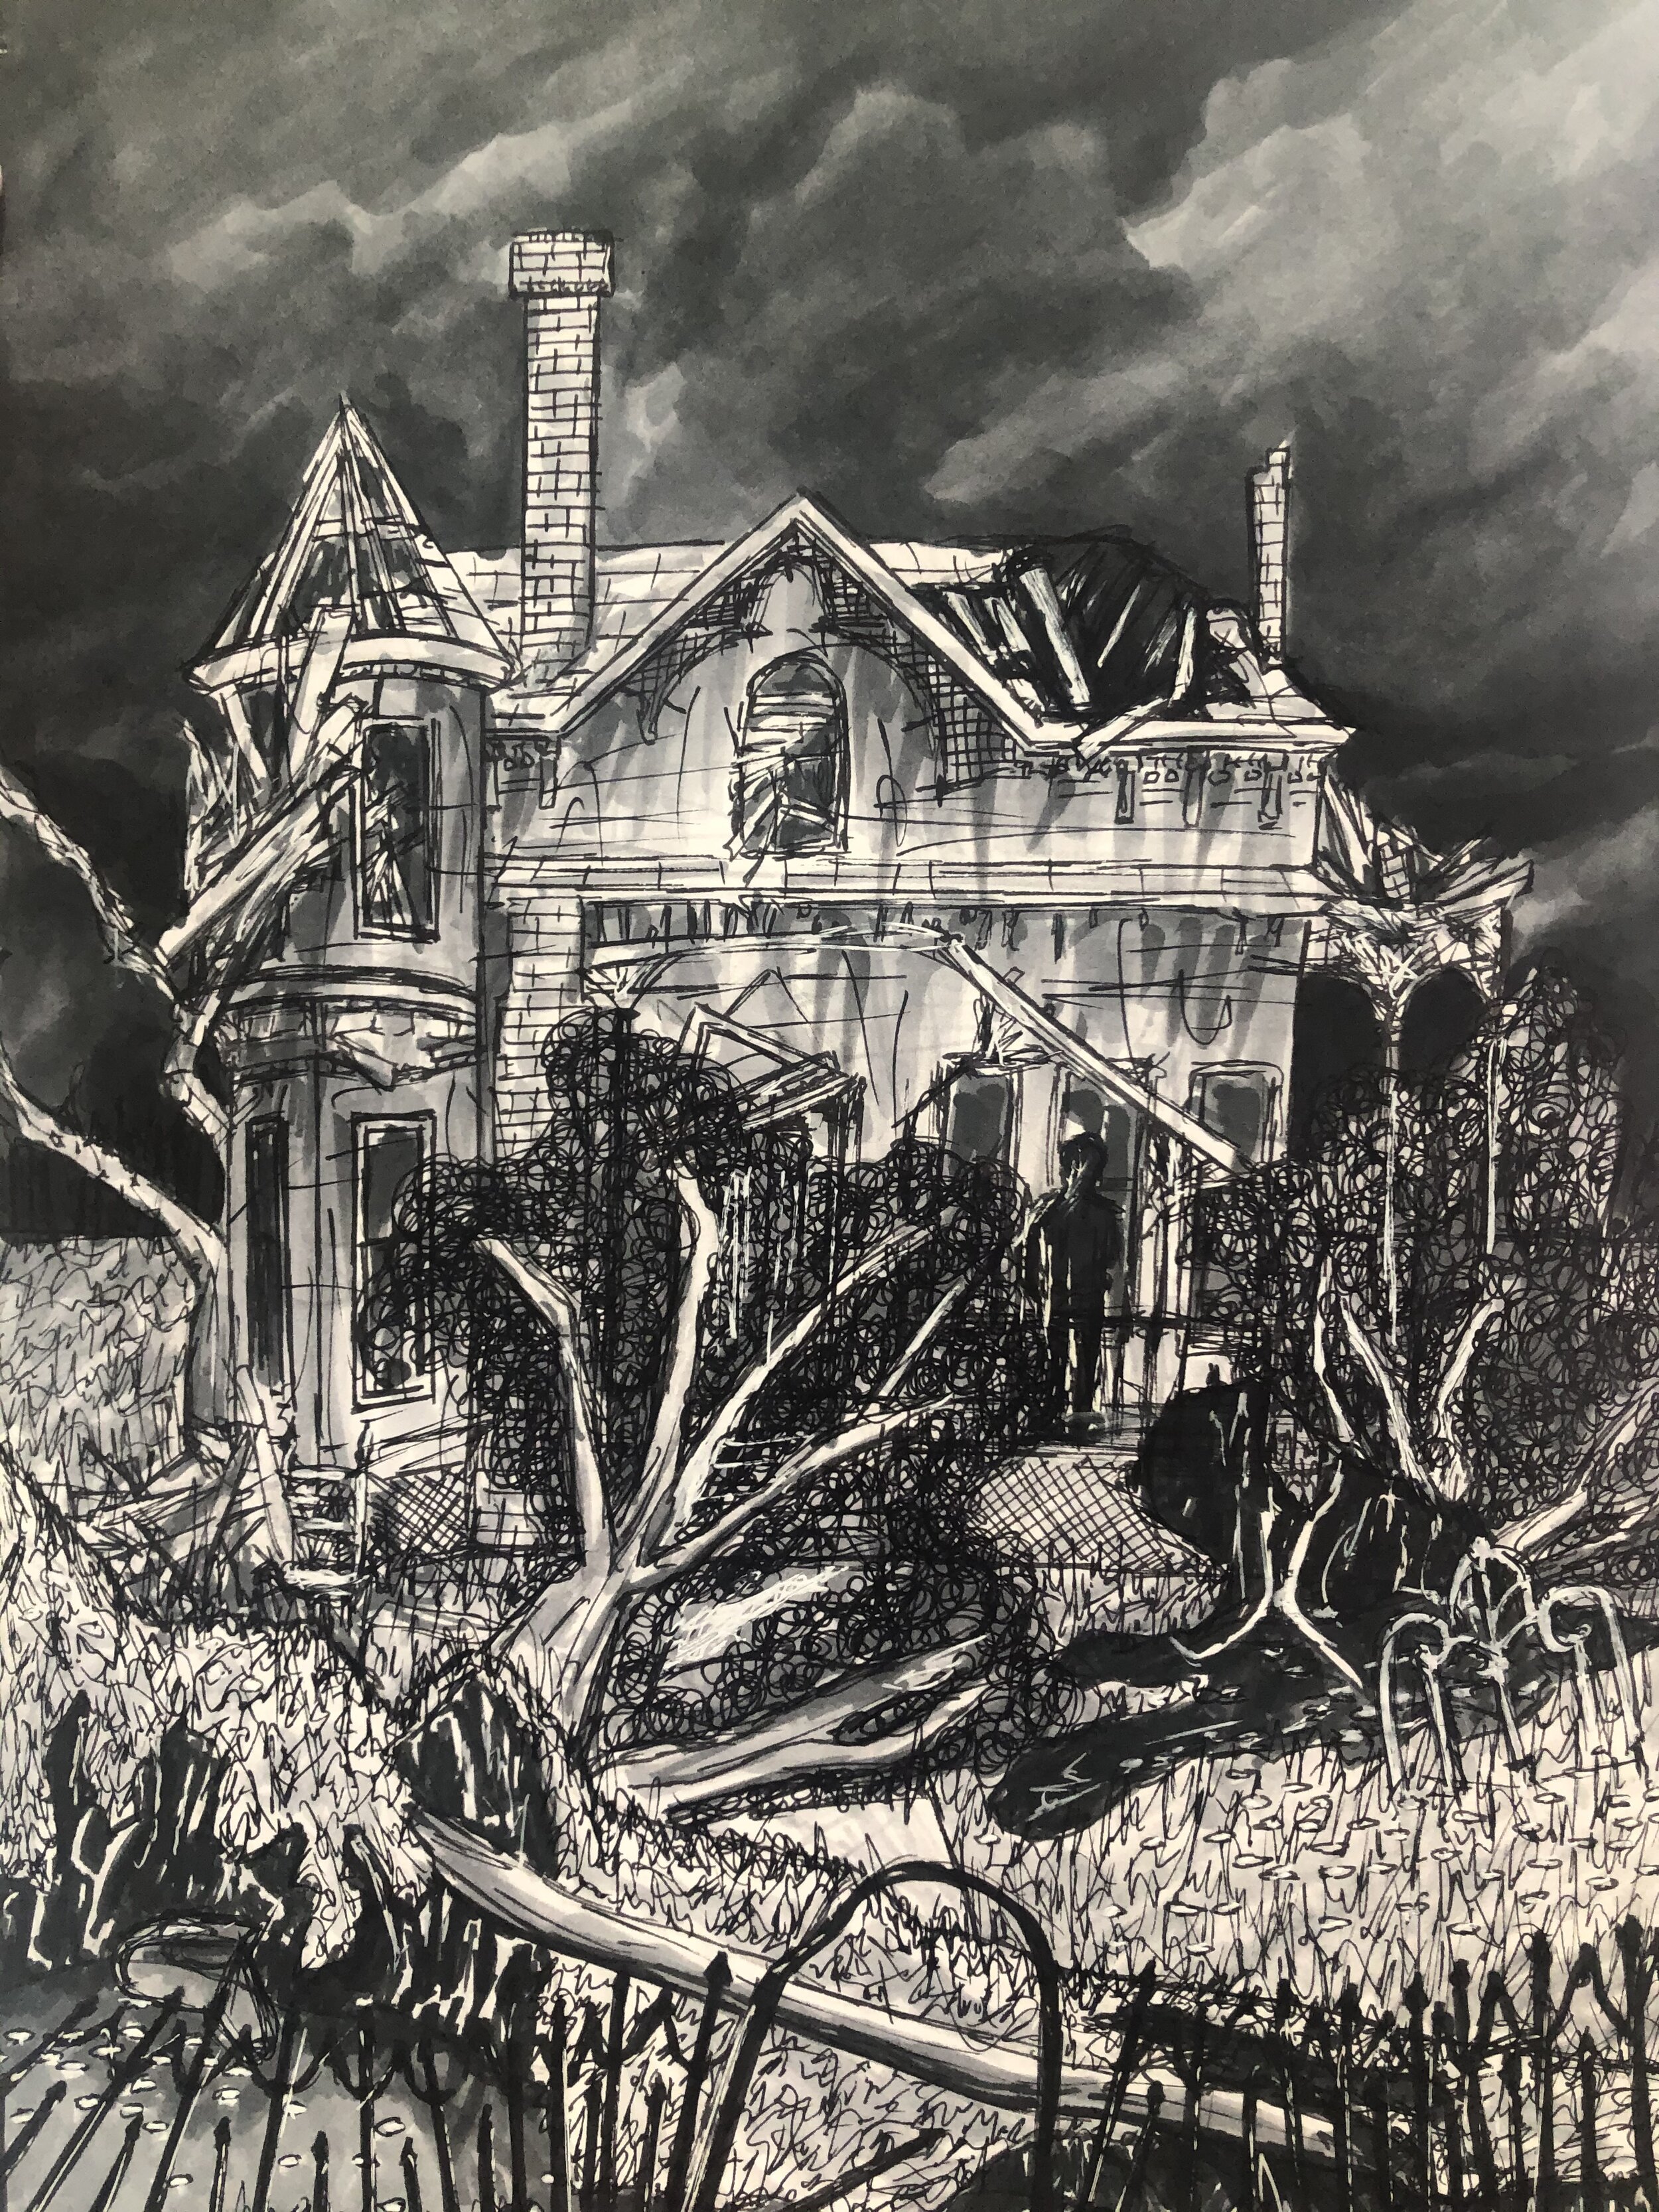 CONCEPT RENDERING | HAUNTED HOUSE